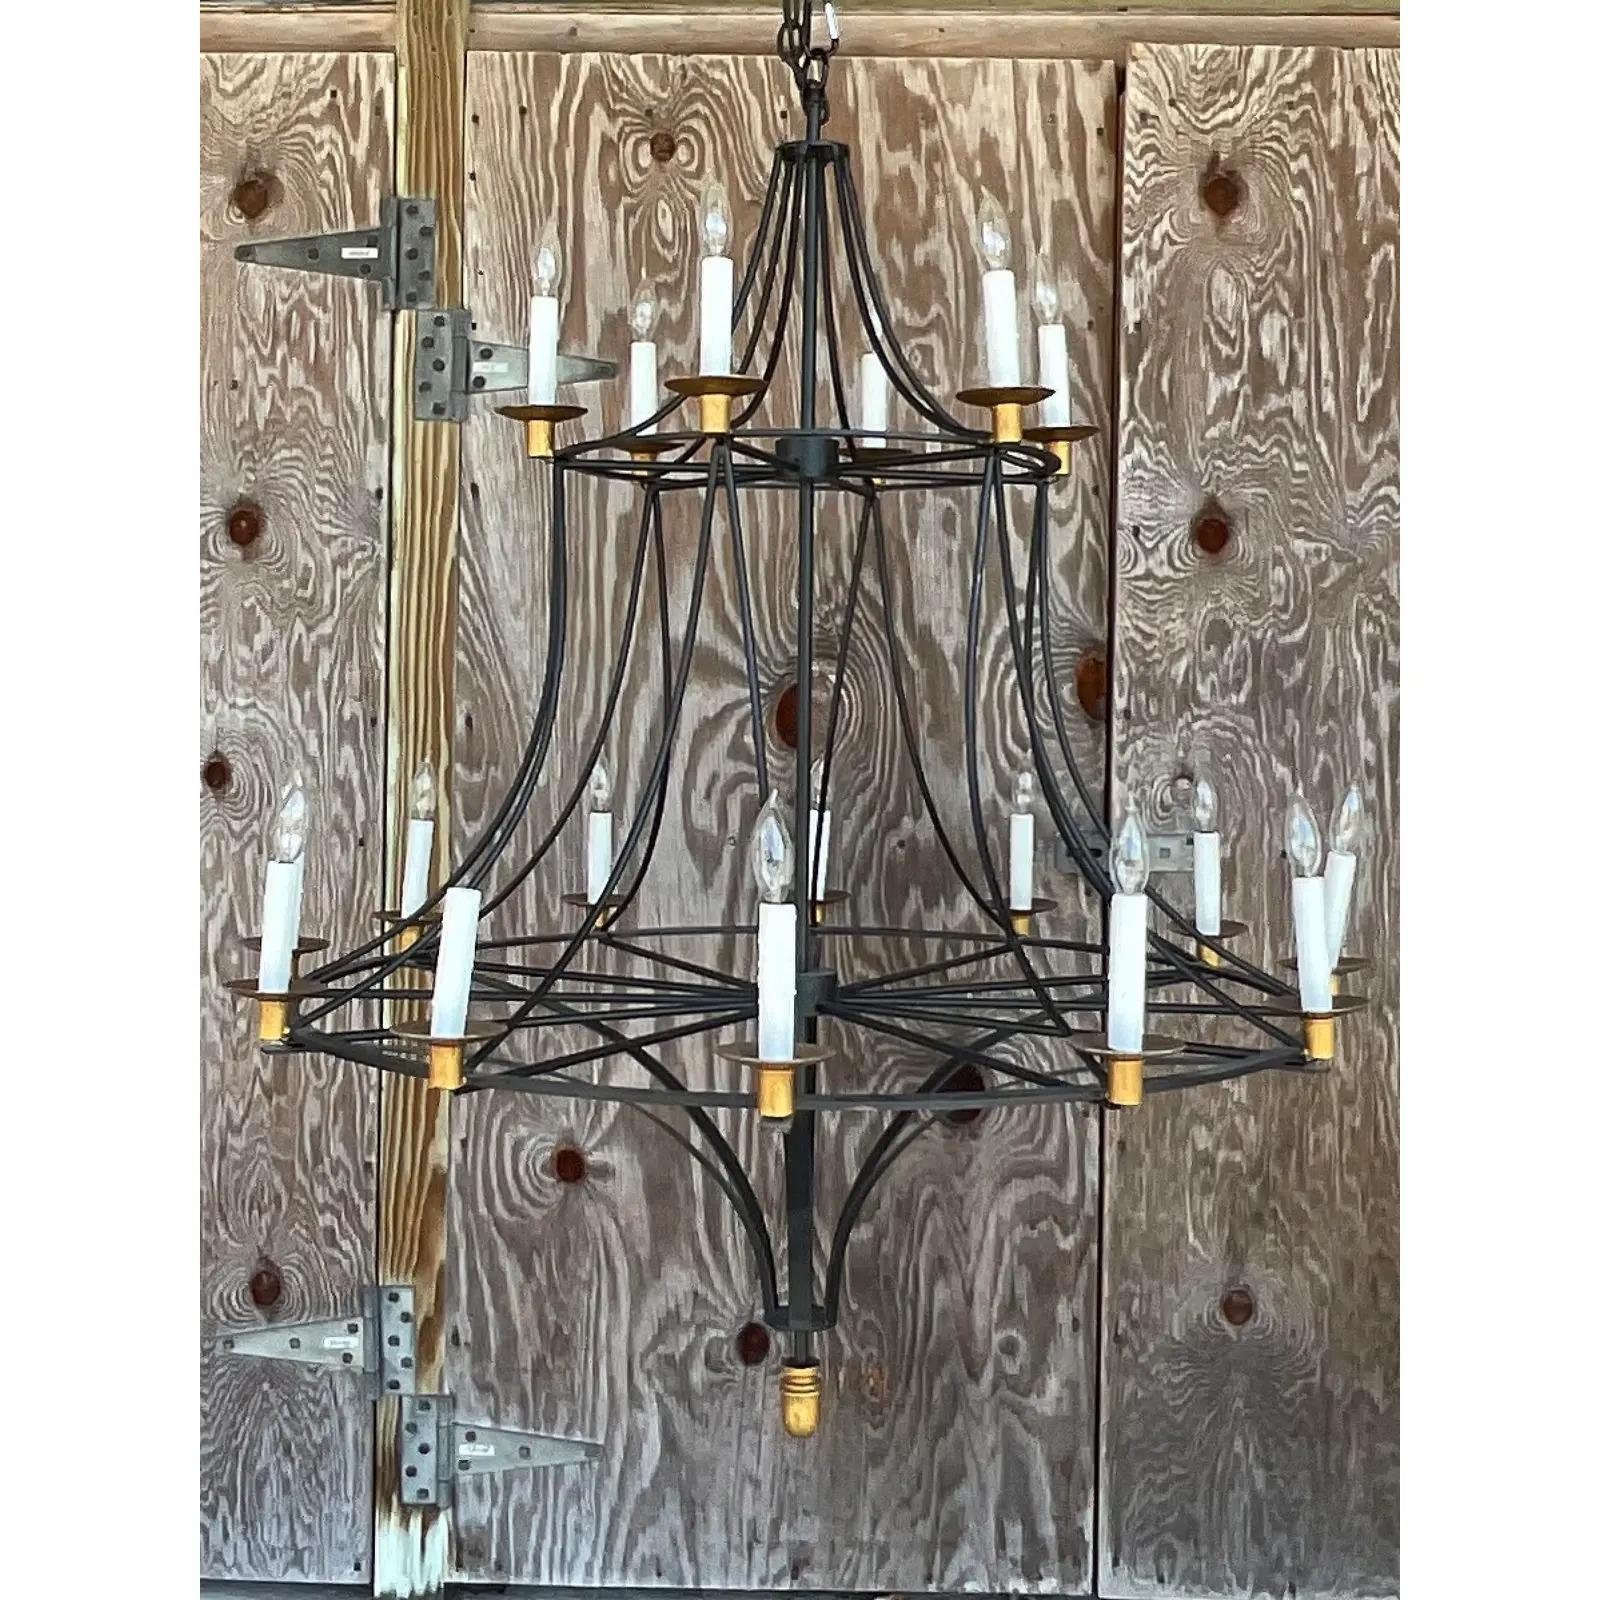 Fantastic vintage Boho chandelier. Monumental in size and drama. Black wrought iron with gilt touches. Acquired from a Boca estate.